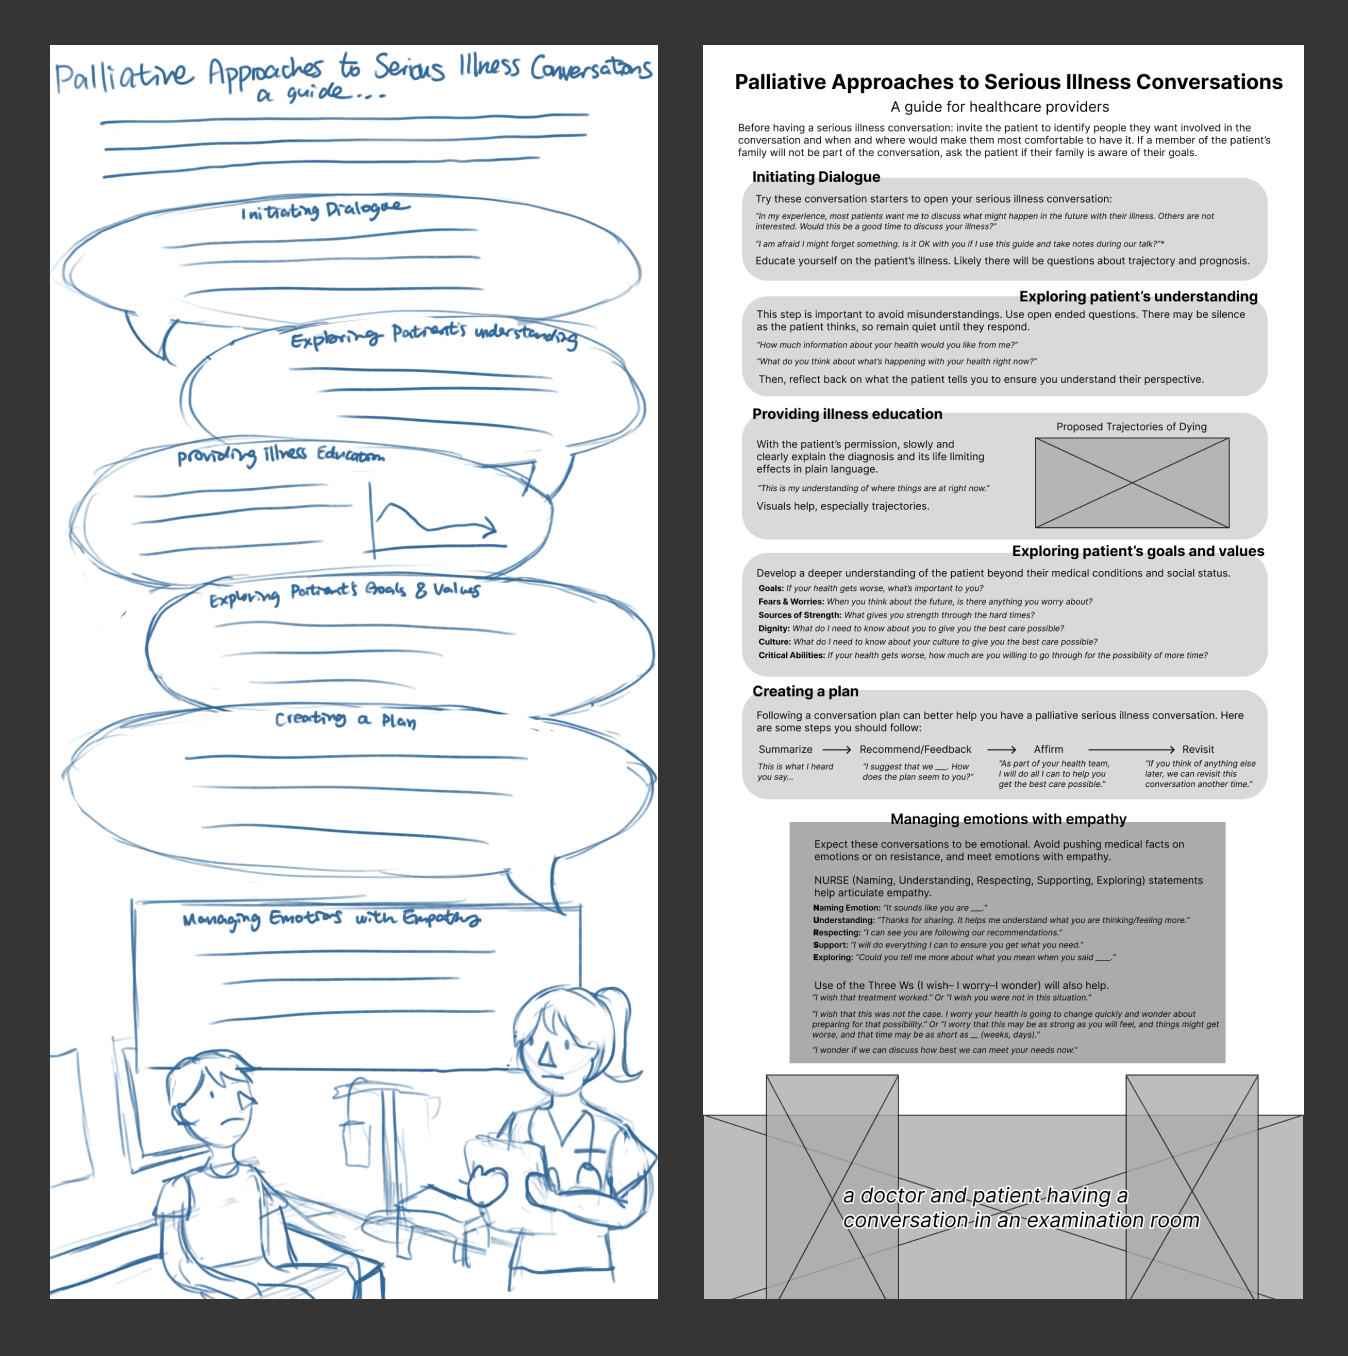 My sketches of the layout as well as the wireframe I made with the finalized content